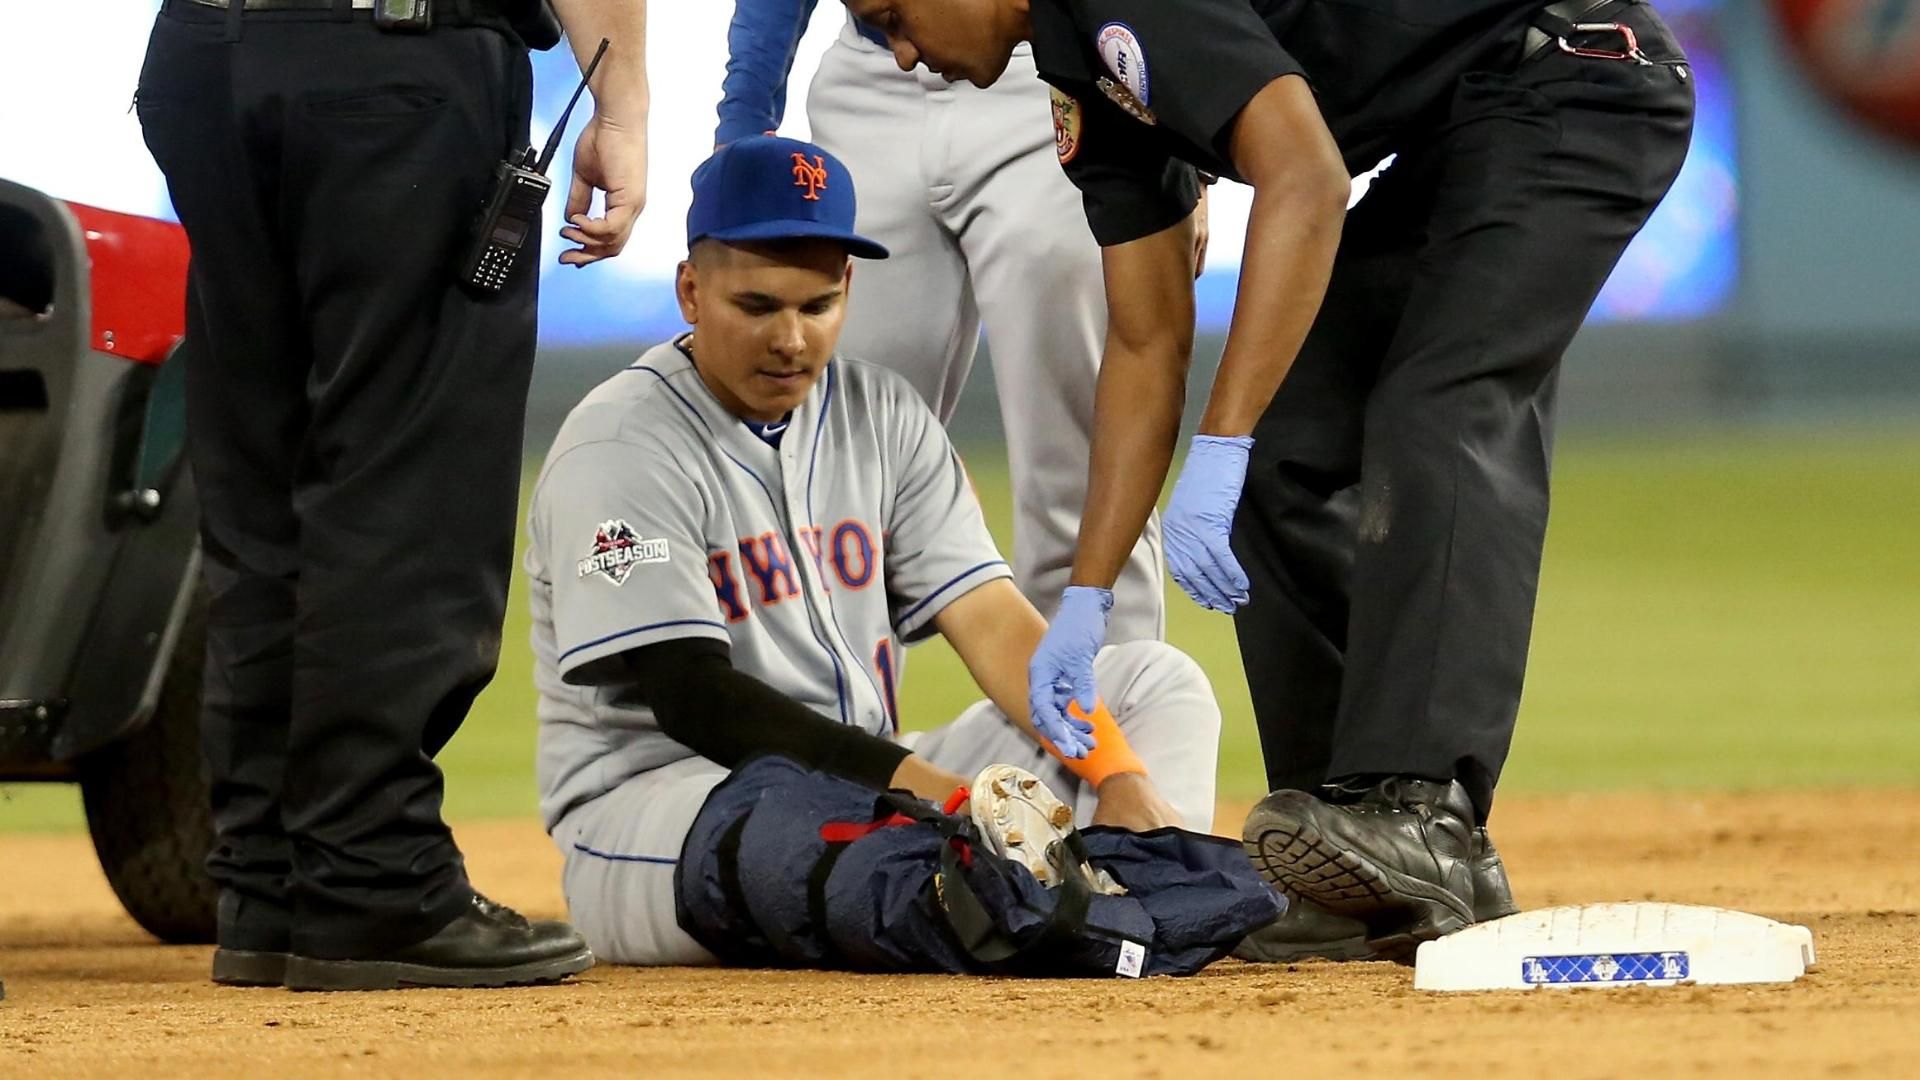 Utley's slide takes out Tejada, causes controversy